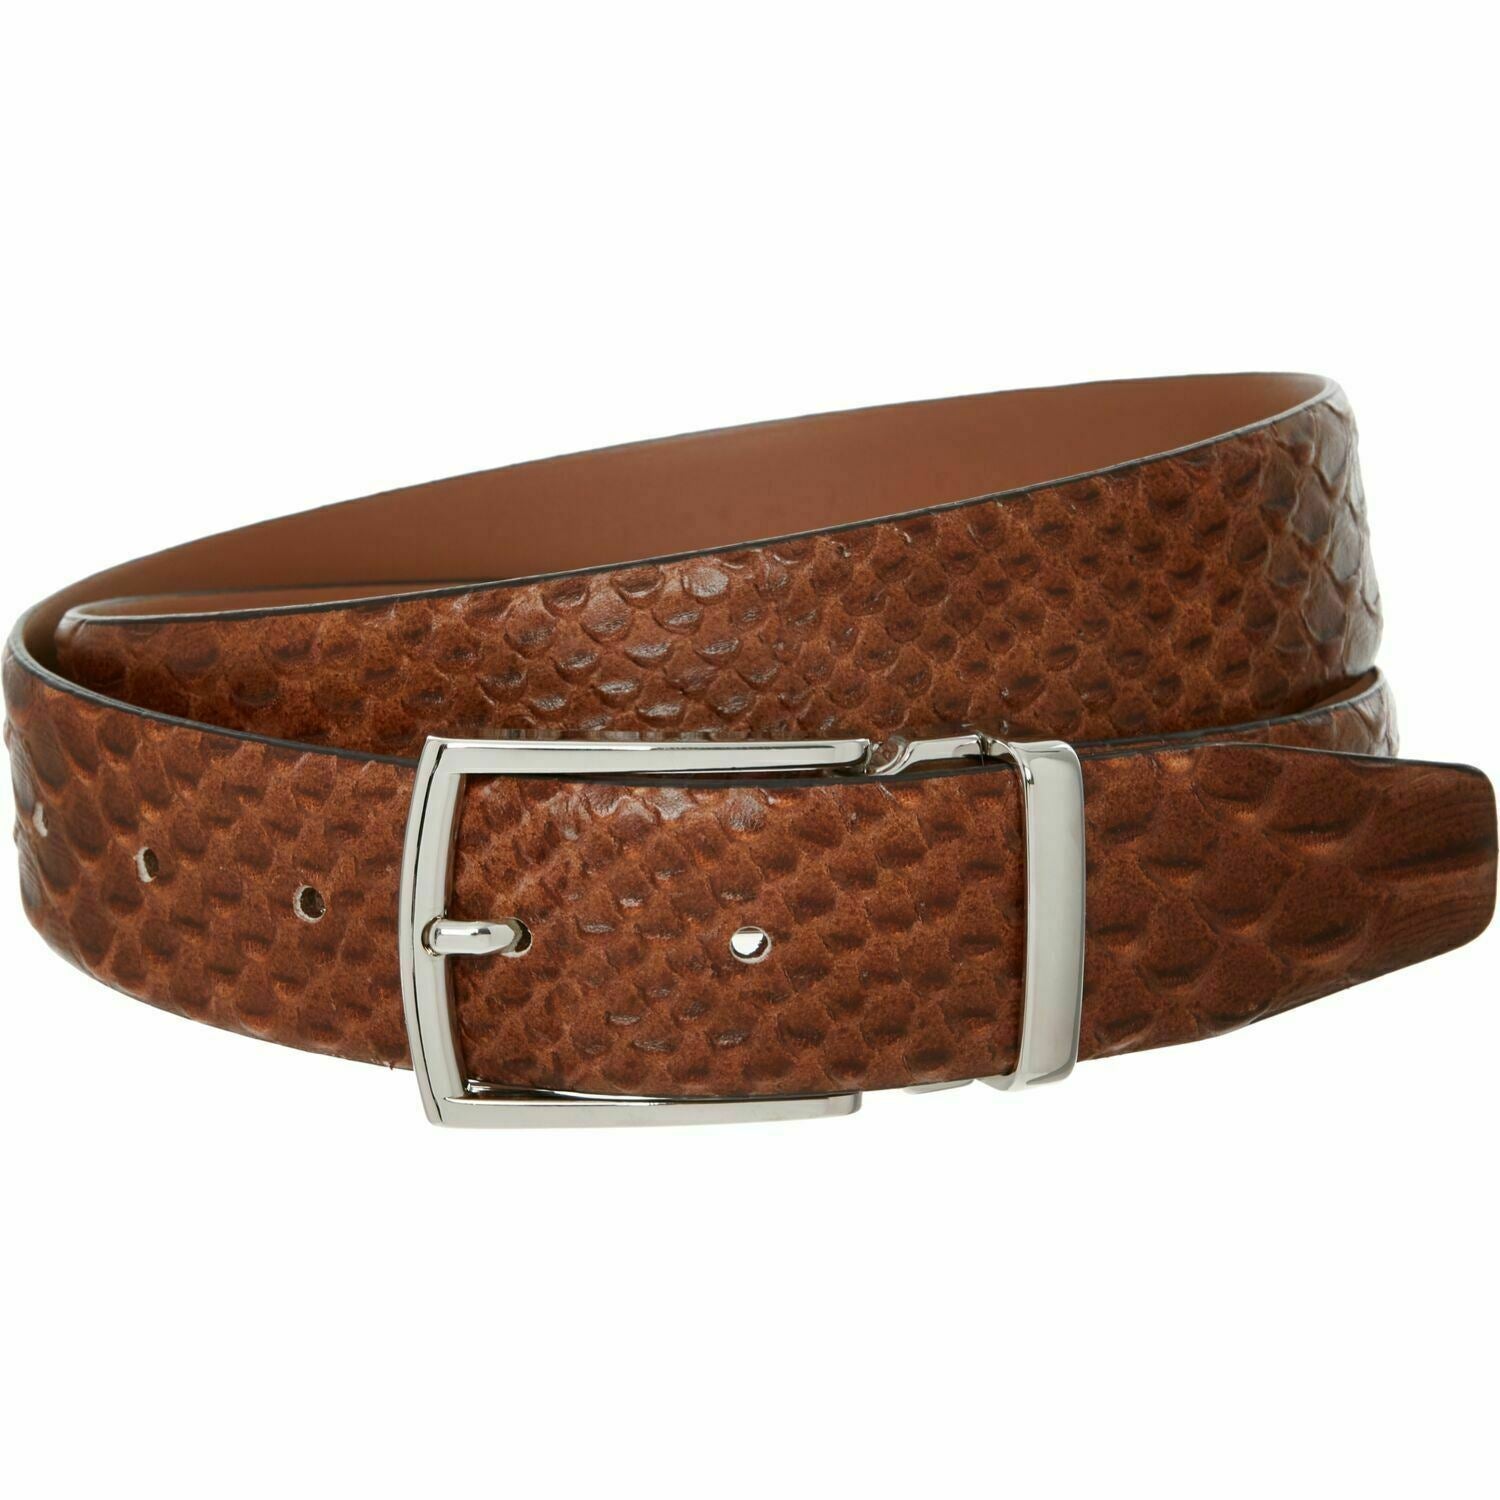 ANDERSON'S Men's Genuine Leather Reptile Effect Belt, Tan Brown, size W34